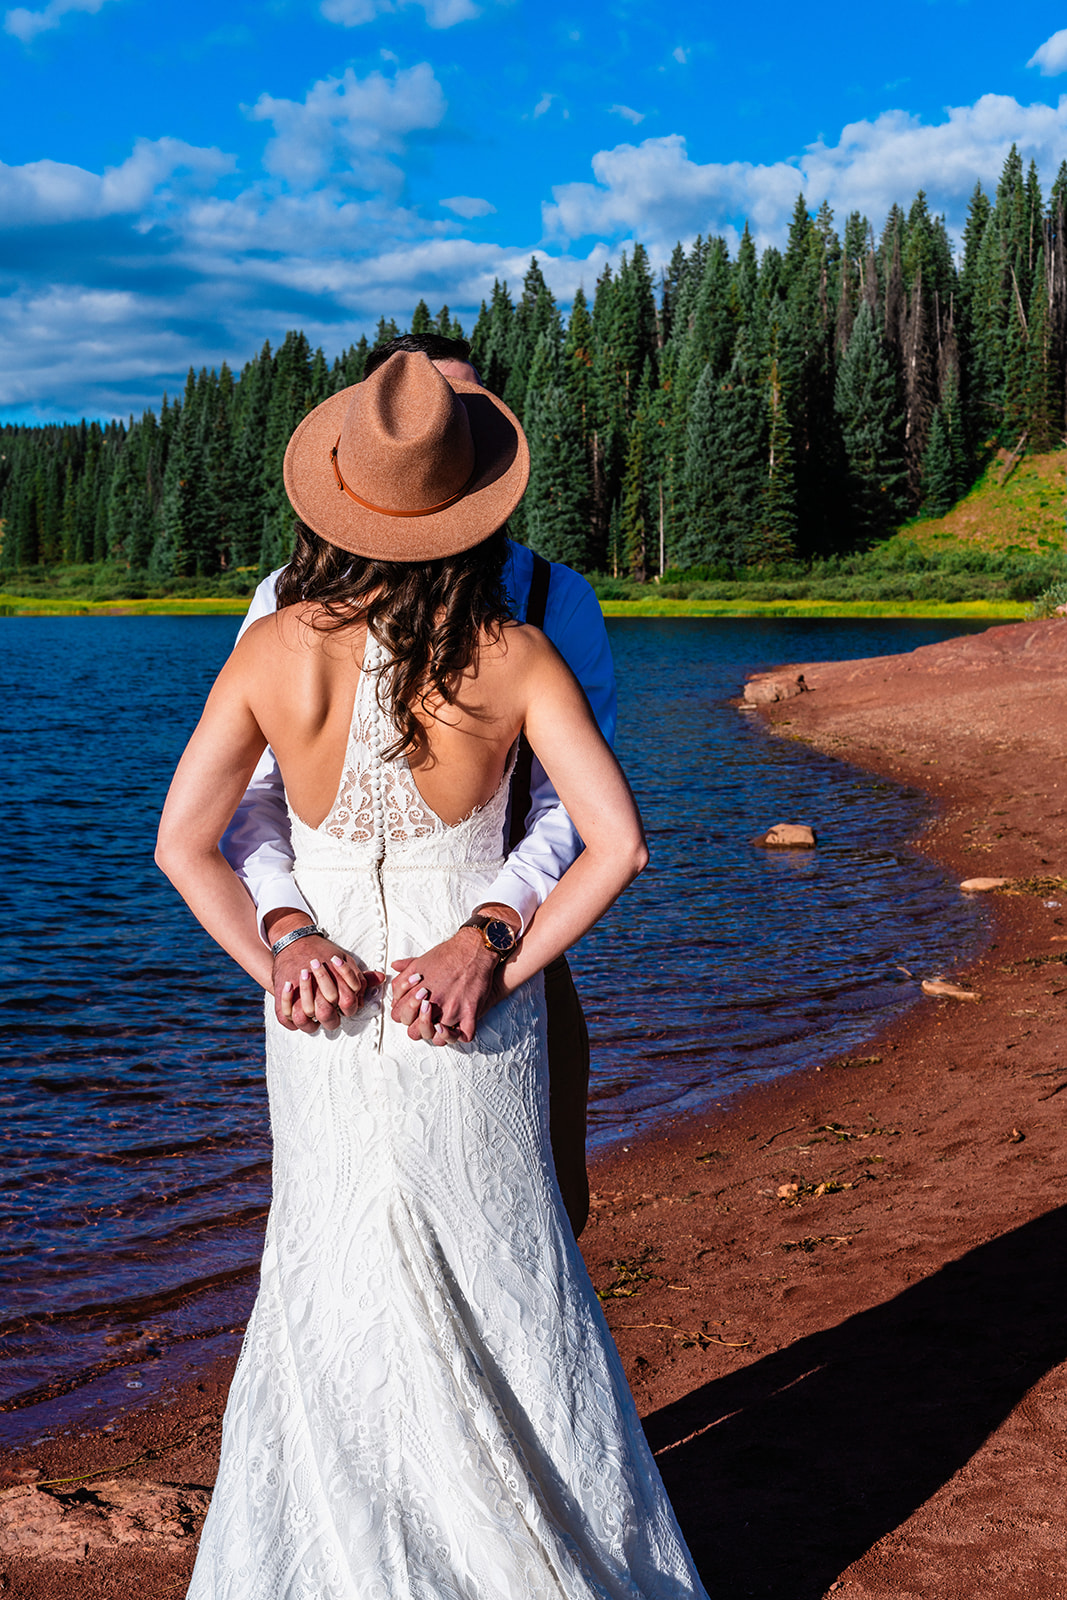 Adventurous bride and groom portraits in the San Juan mountains